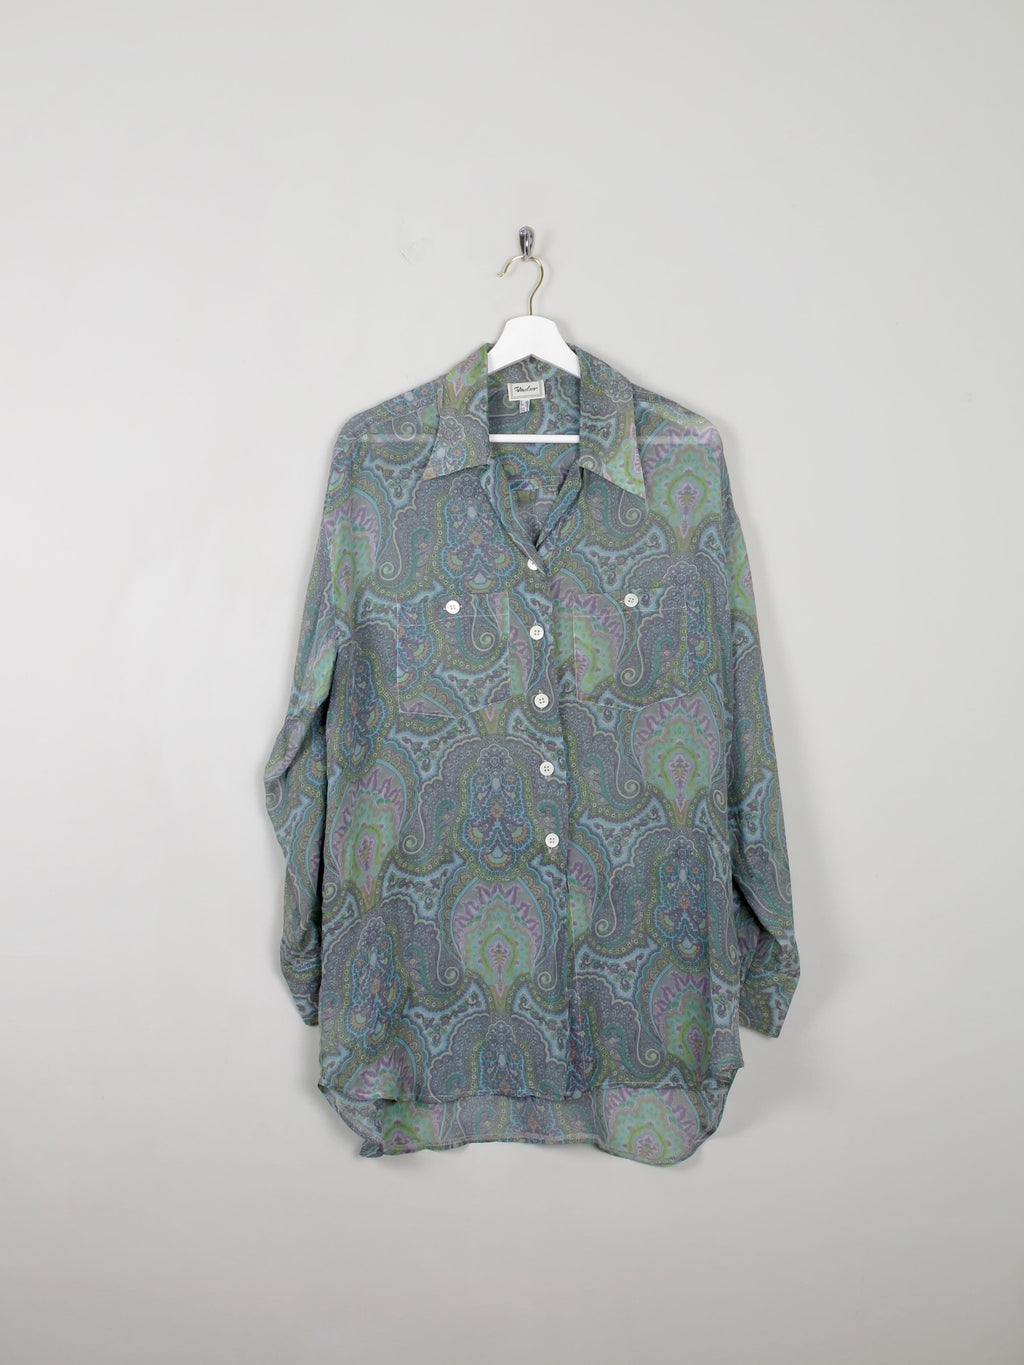 Women's Vintage Silk Paisley Blouse With Collar S/M/L - The Harlequin